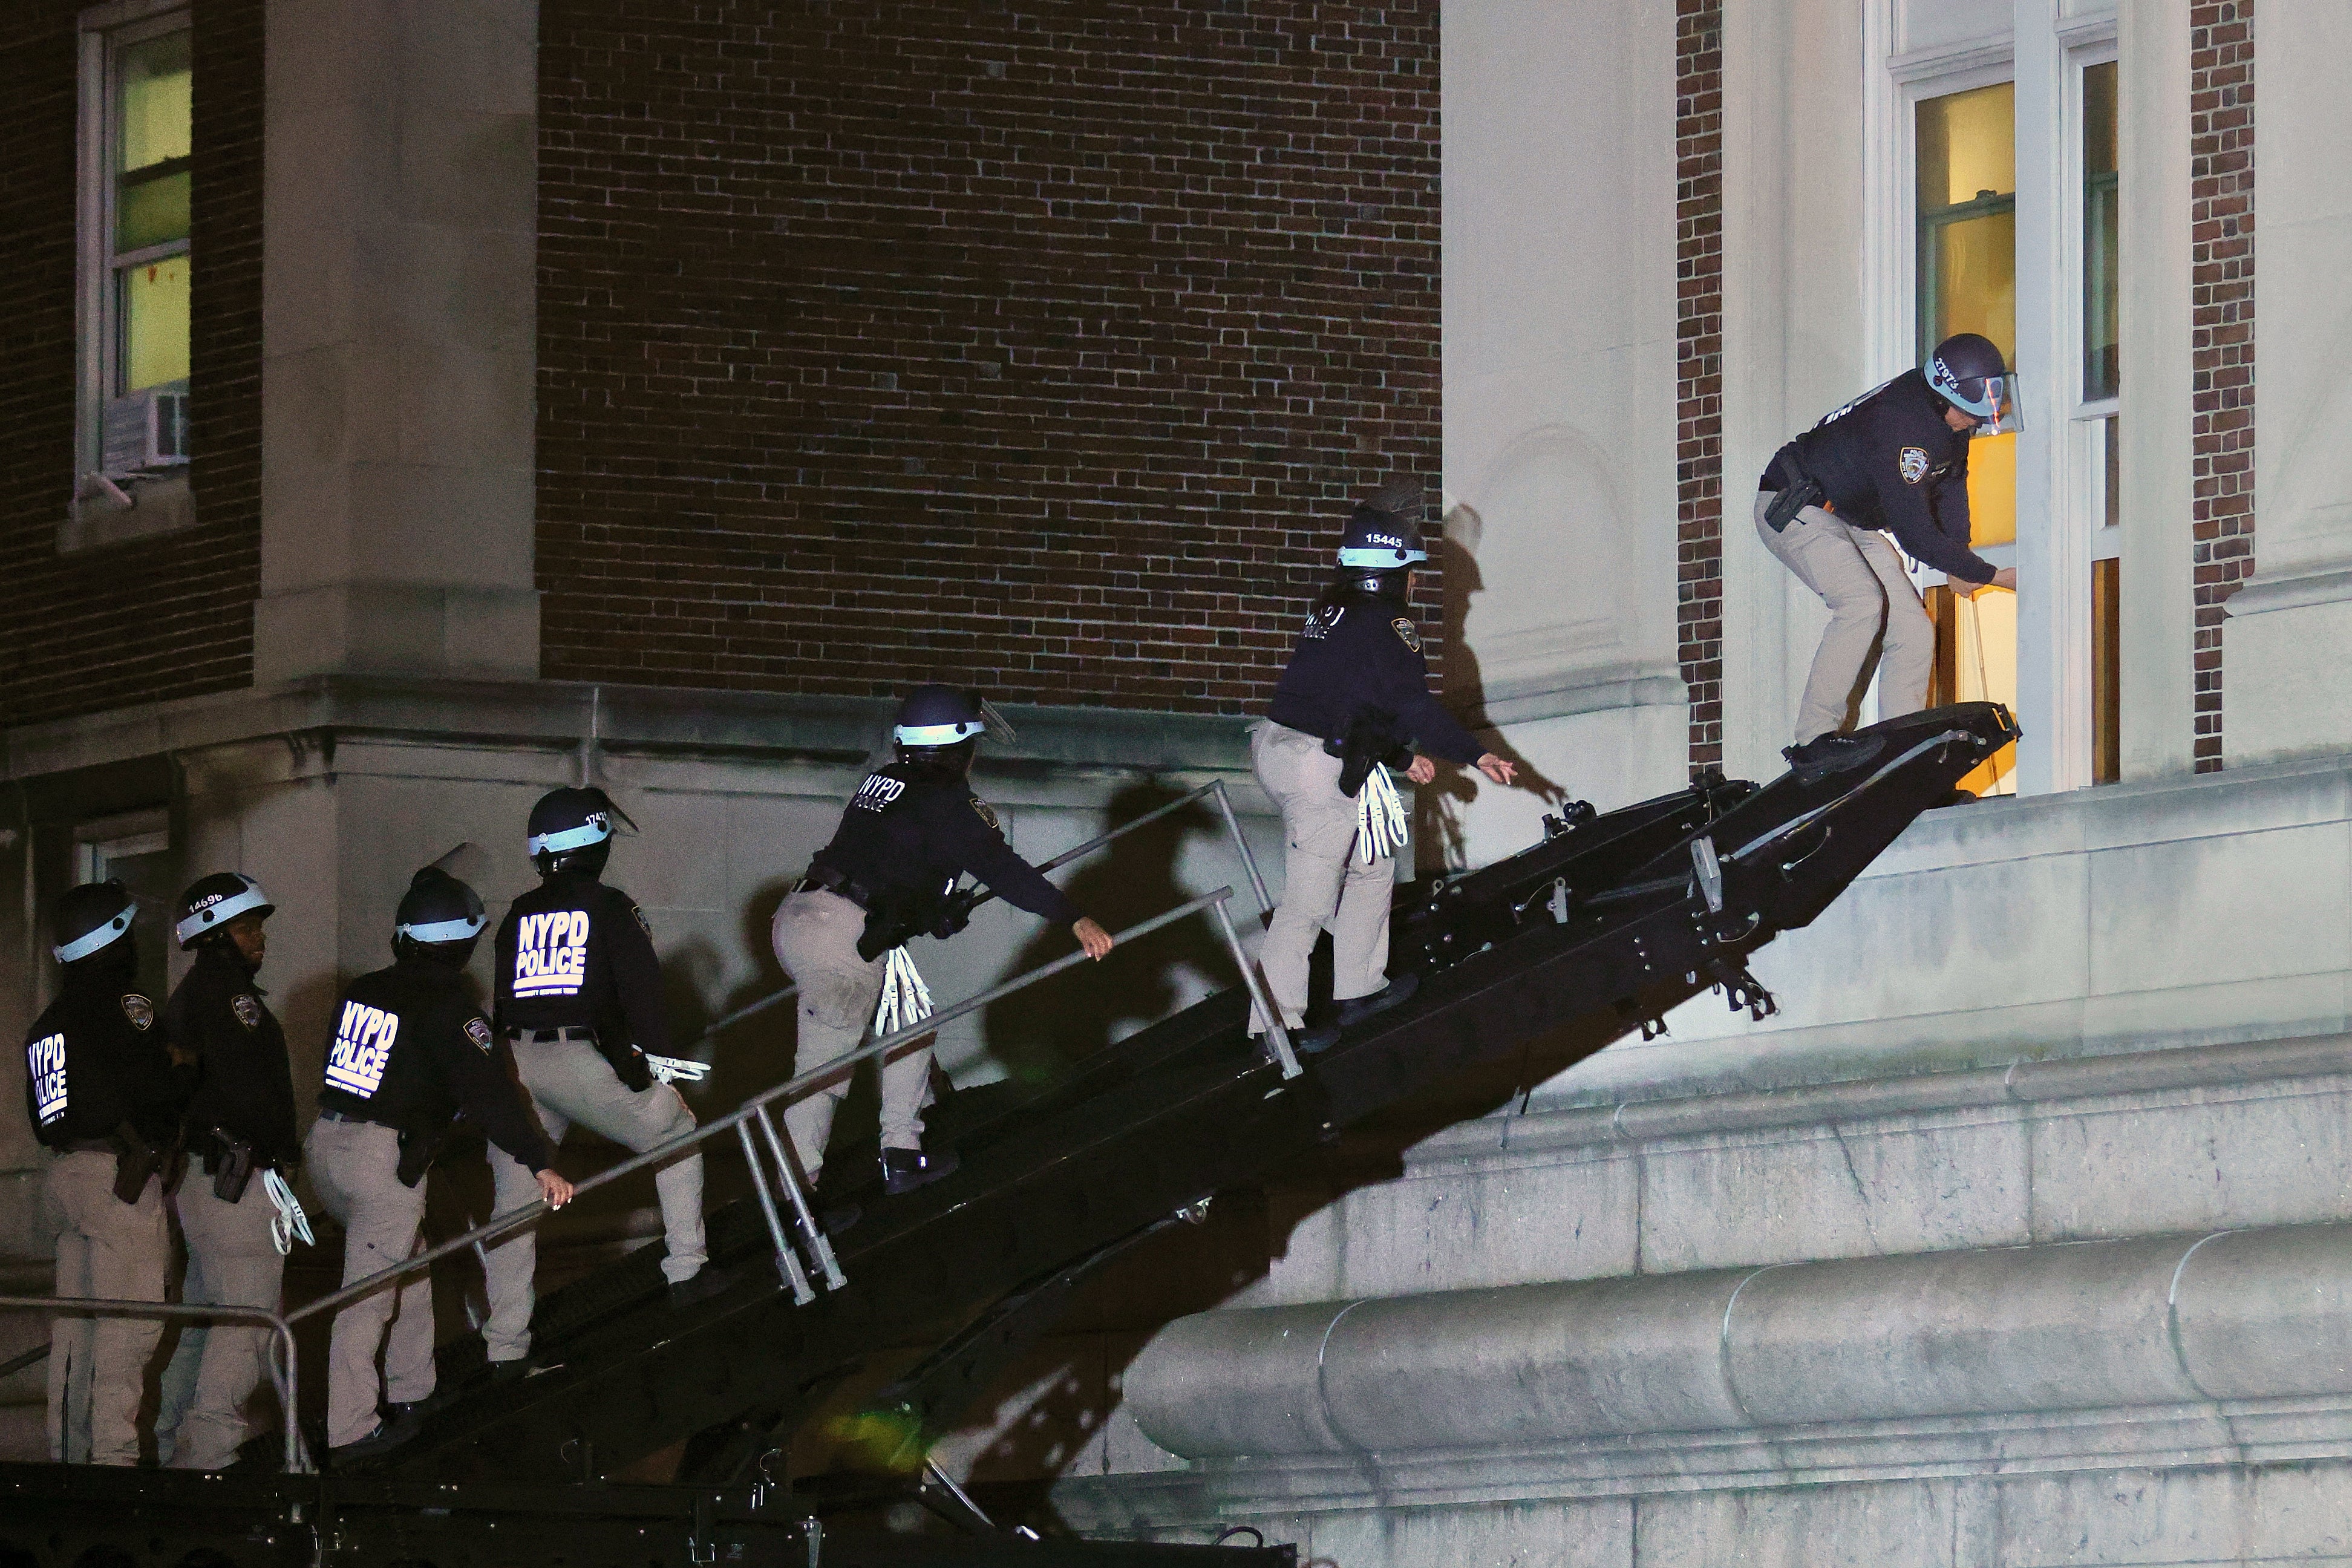 NYPD officers, pictured entered Hamilton Hall on Tuesday night on a “SWAT ramp”, which was occupied by pro-Palestinian protesters. Some journalists are criticising the school for reportedly limiting access to campus during police activity